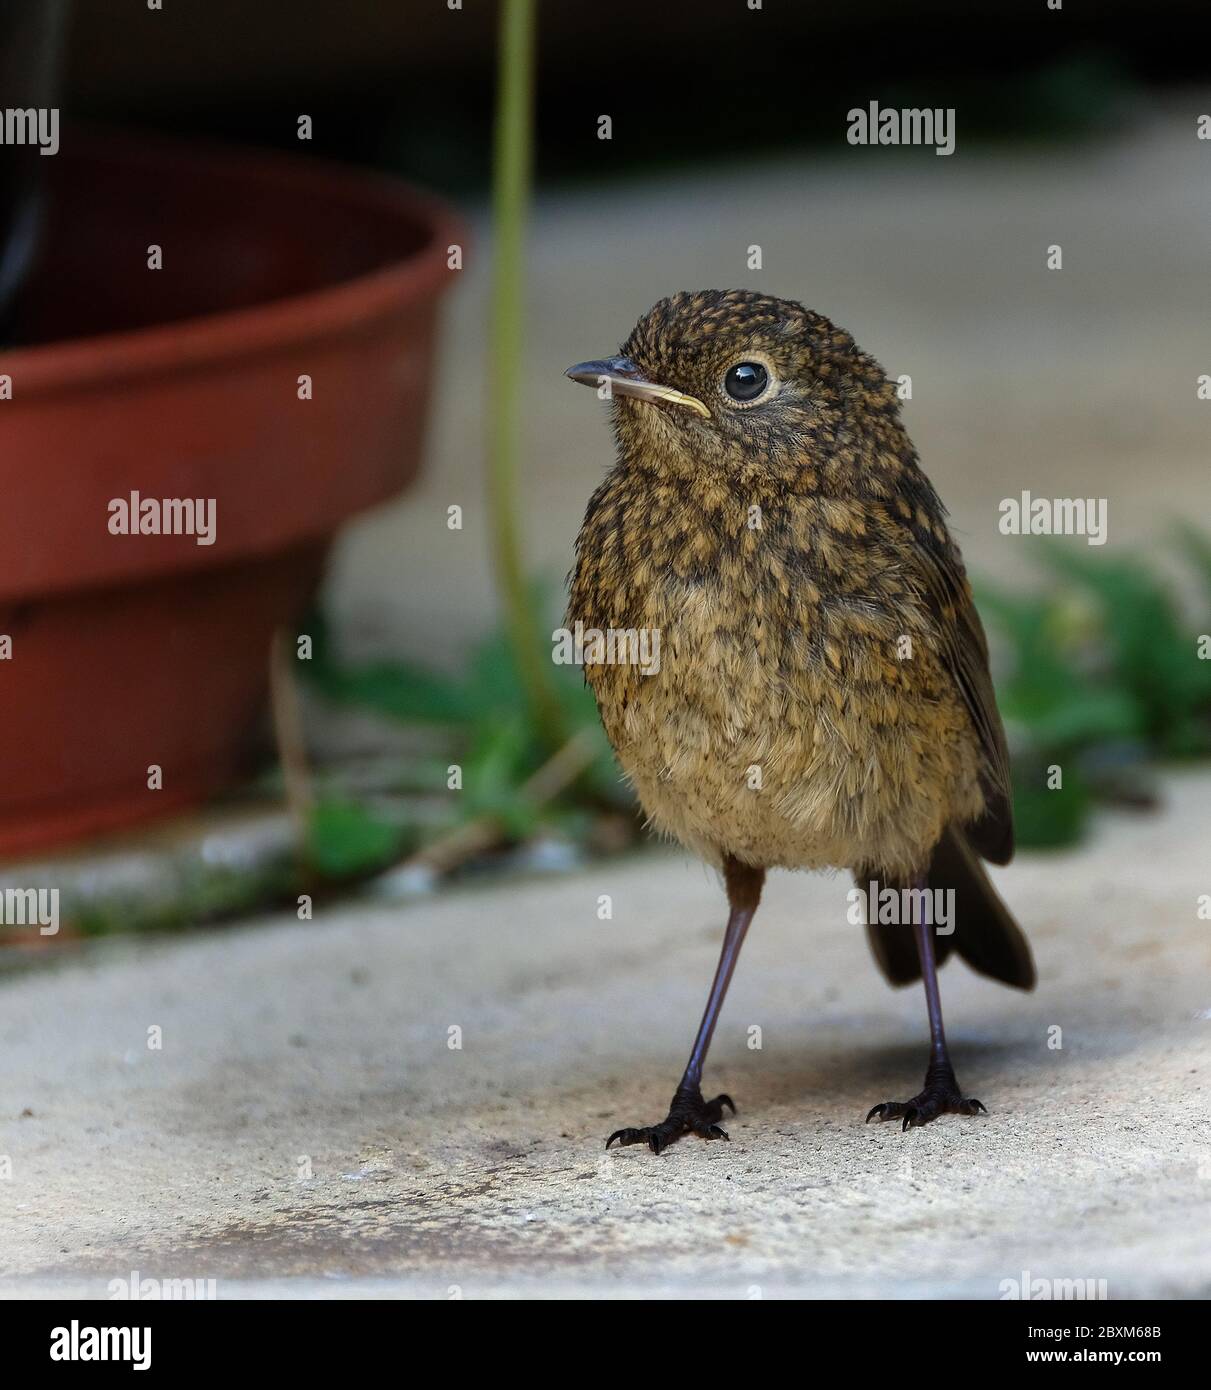 Young Robin in urban house garden waiting to be fed. Stock Photo